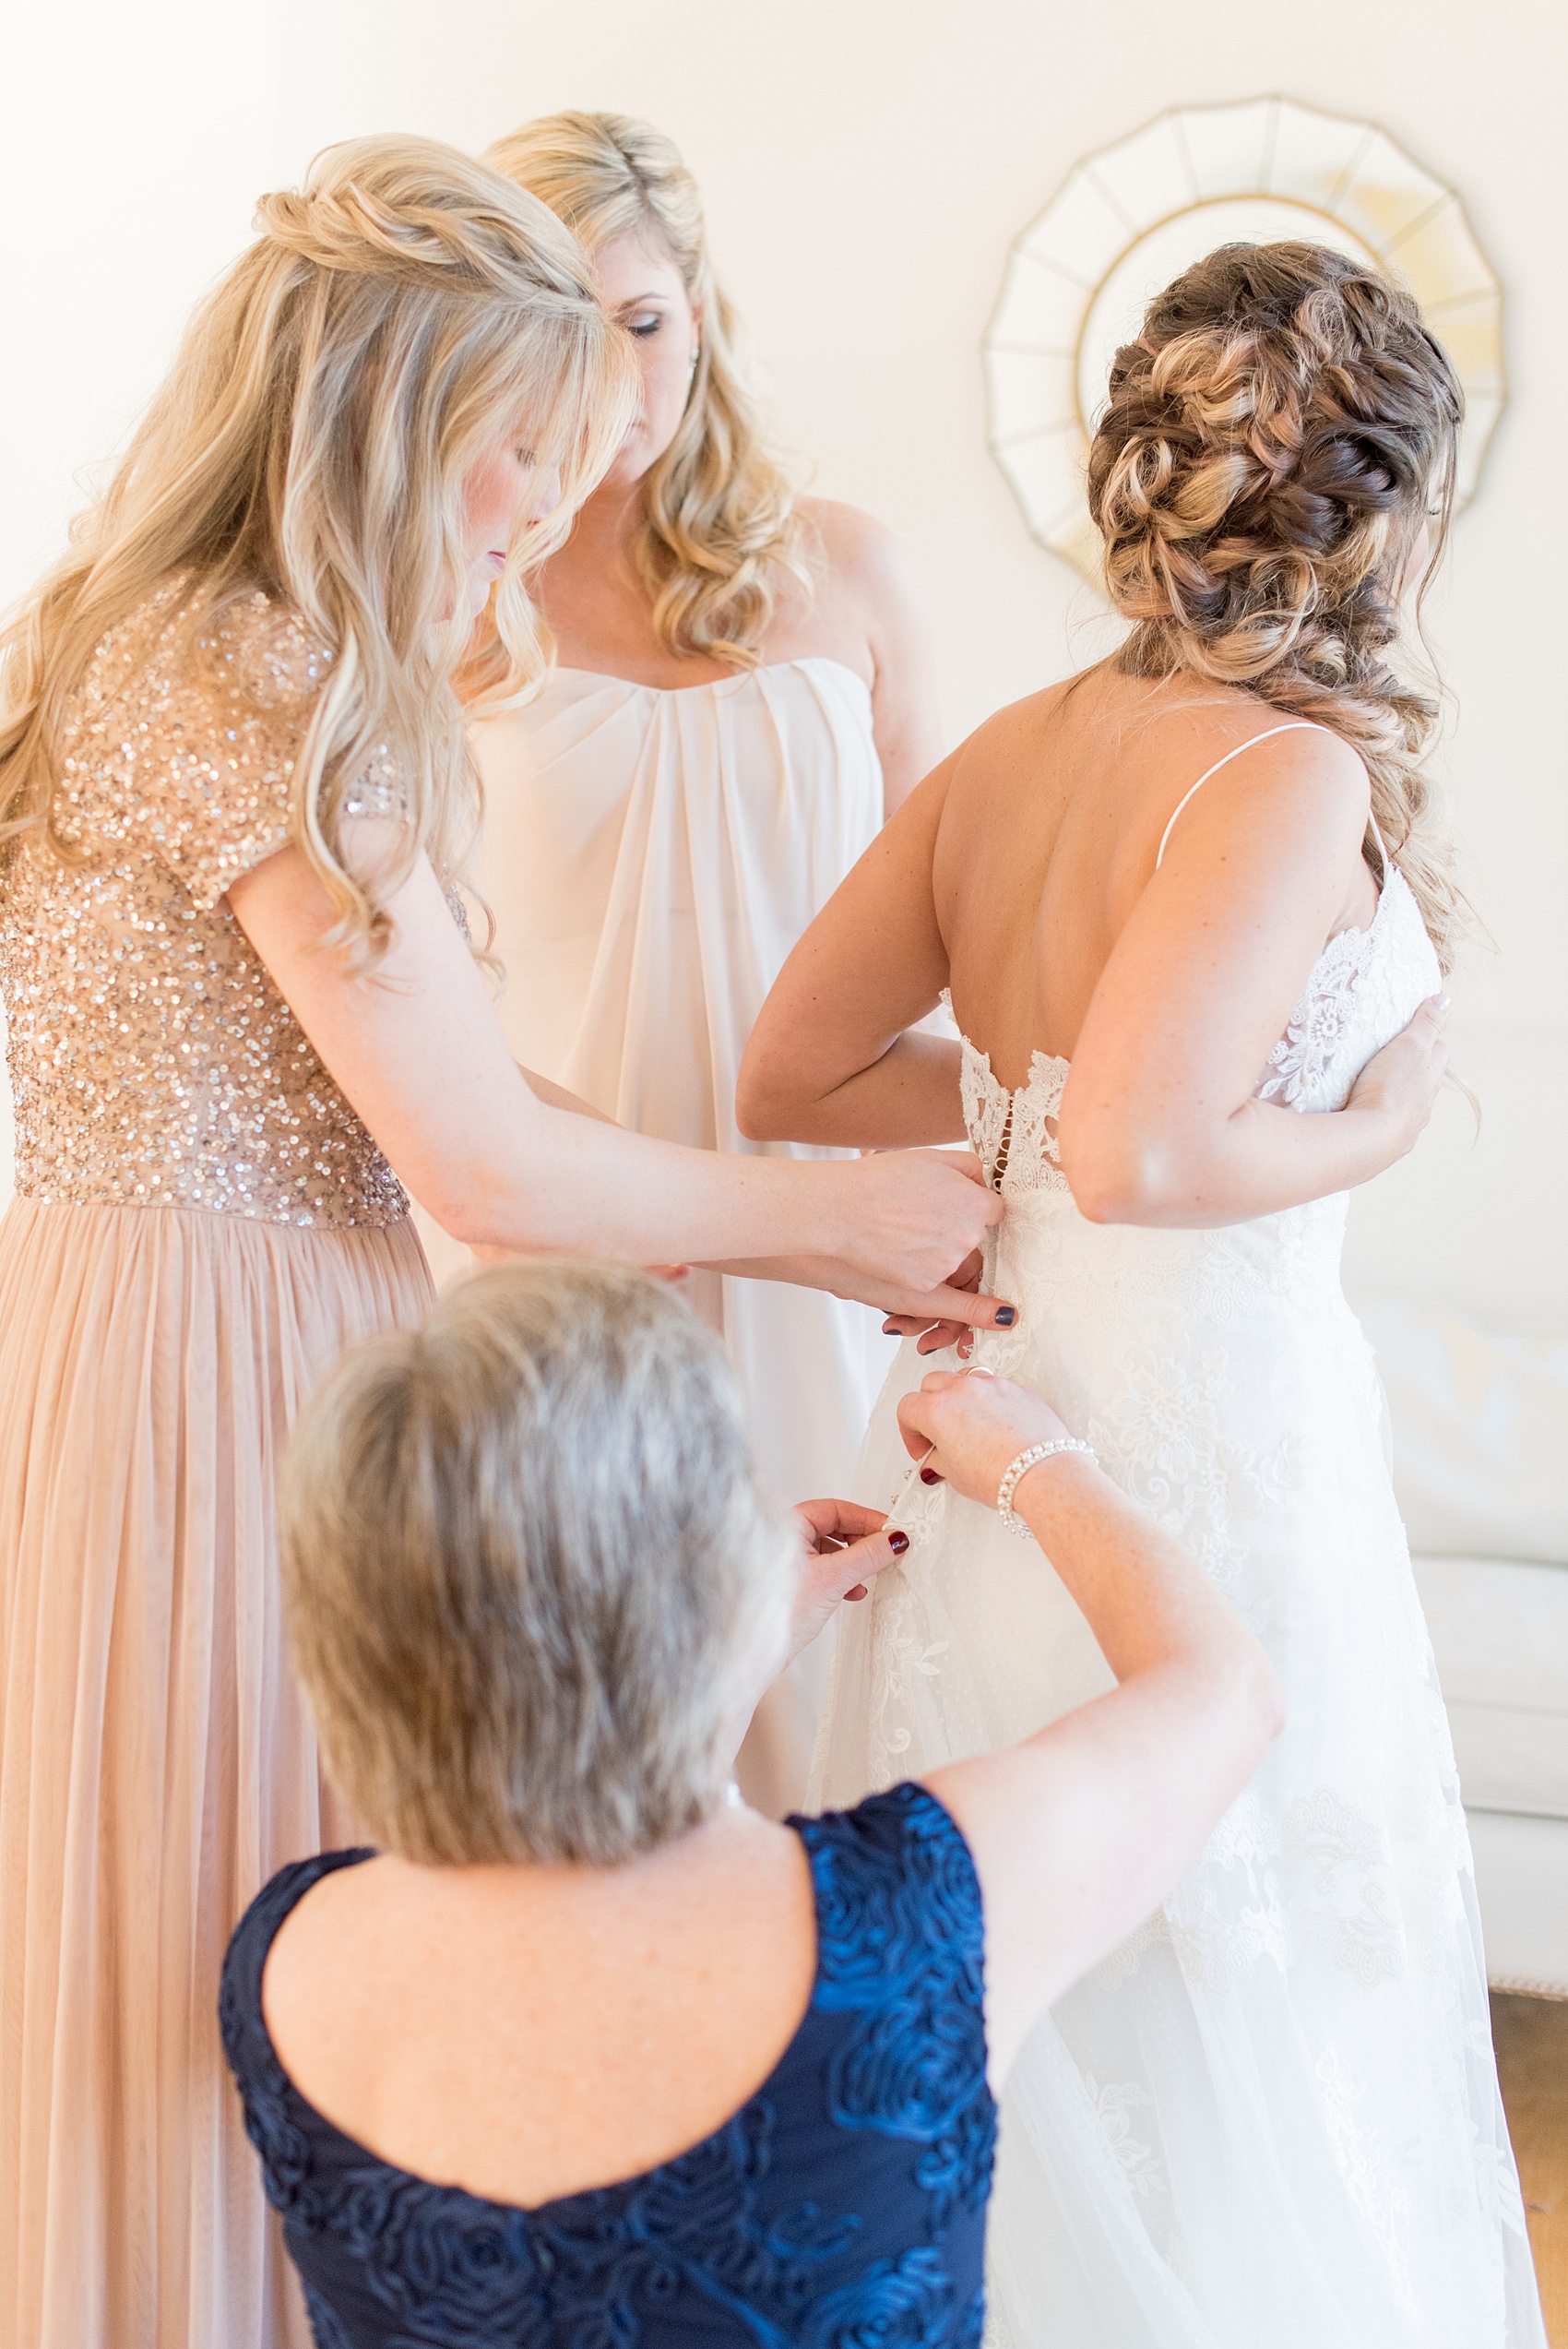 Pictures from a Christmas inspired wedding in downtown Raleigh, North Carolina by Mikkel Paige Photography. The bride and bridesmaids got ready for the church ceremony and reception at The Stockroom at 230, at The Glass Box in mismatched pink dresses. Click through for more ideas from a beautiful celebration, including decor photos in a green and gold decor palette. #mikkelpaige #raleighweddingphotographer #downtownRaleigh #greenandgoldwedding #gettingready #christmaswedding #bridesmaids #bridal